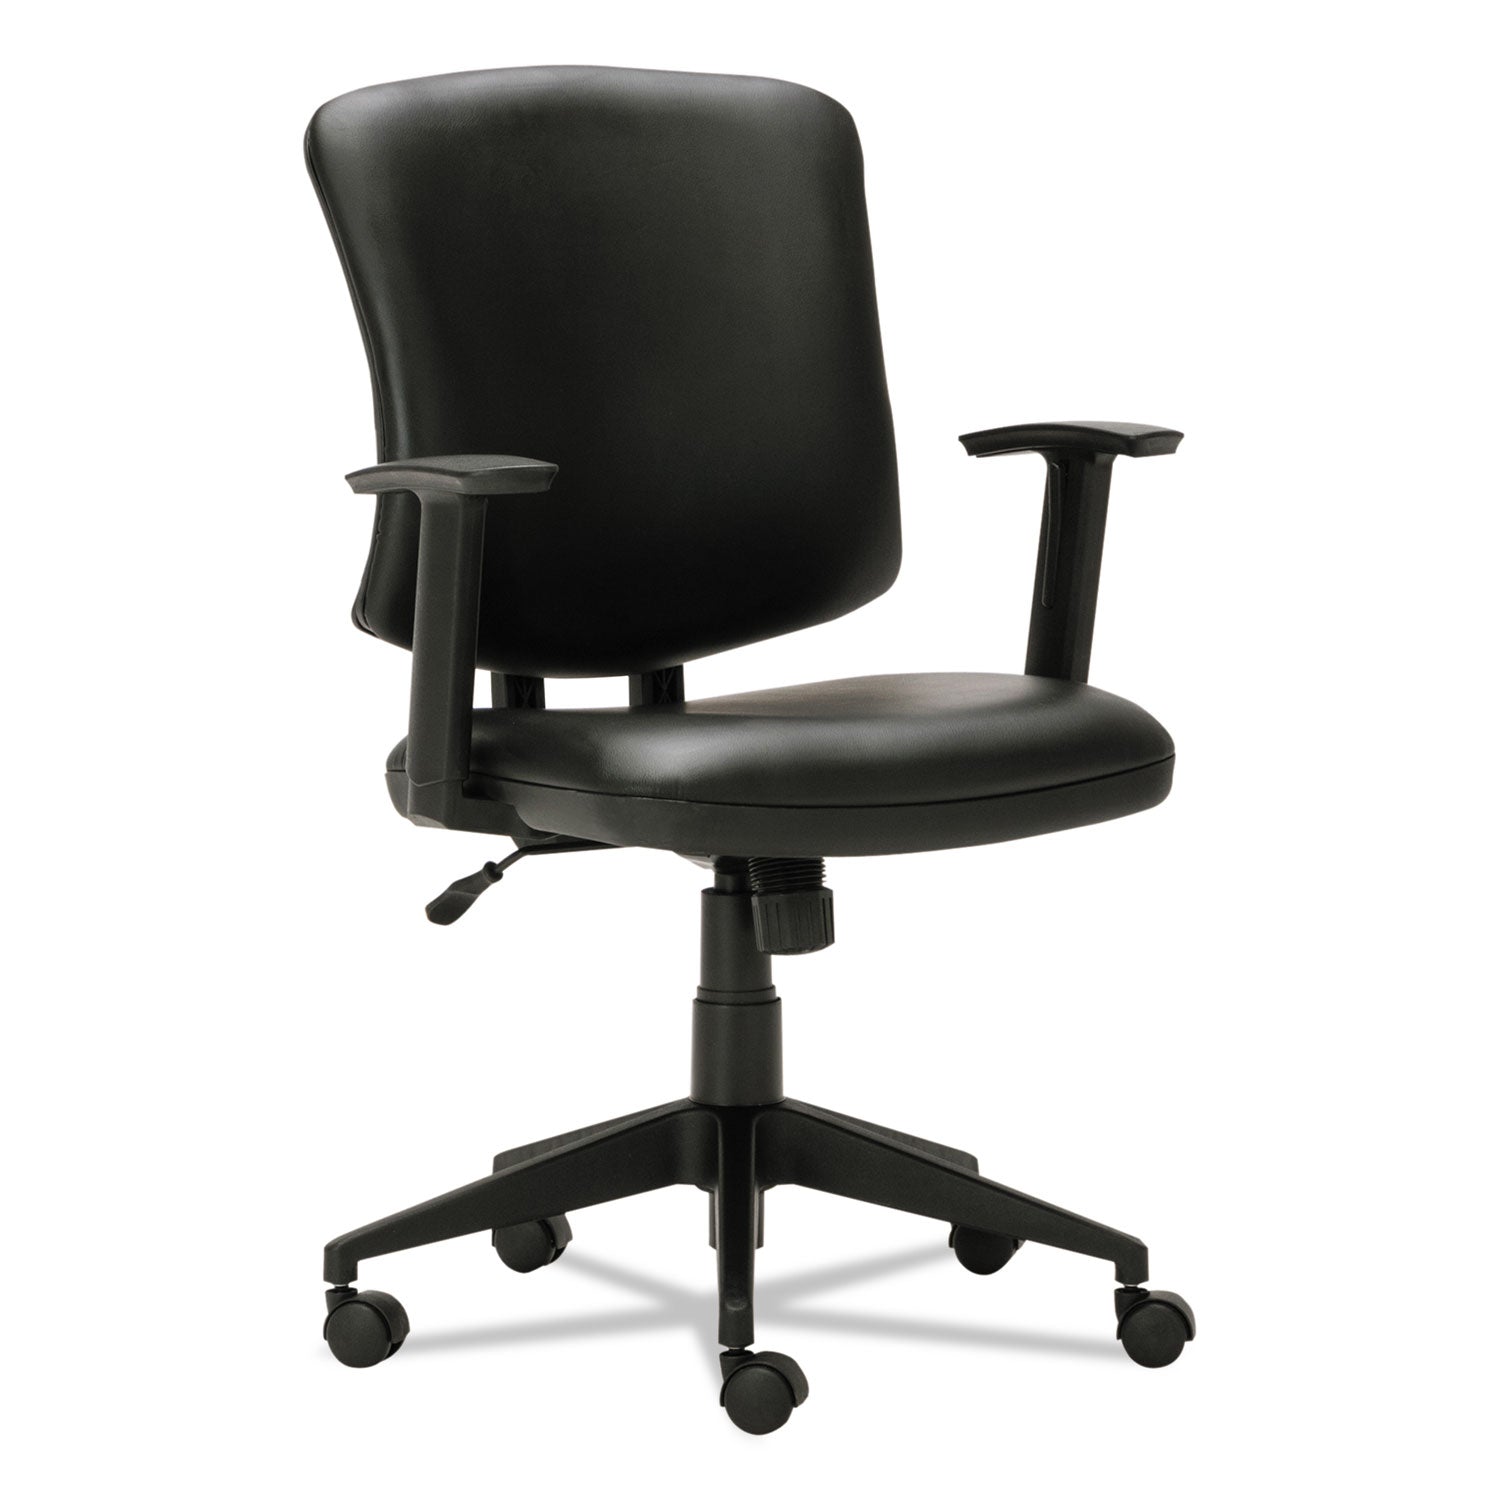 alera-everyday-task-office-chair-bonded-leather-seat-back-supports-up-to-275-lb-176-to-215-seat-height-black_alete4819 - 1